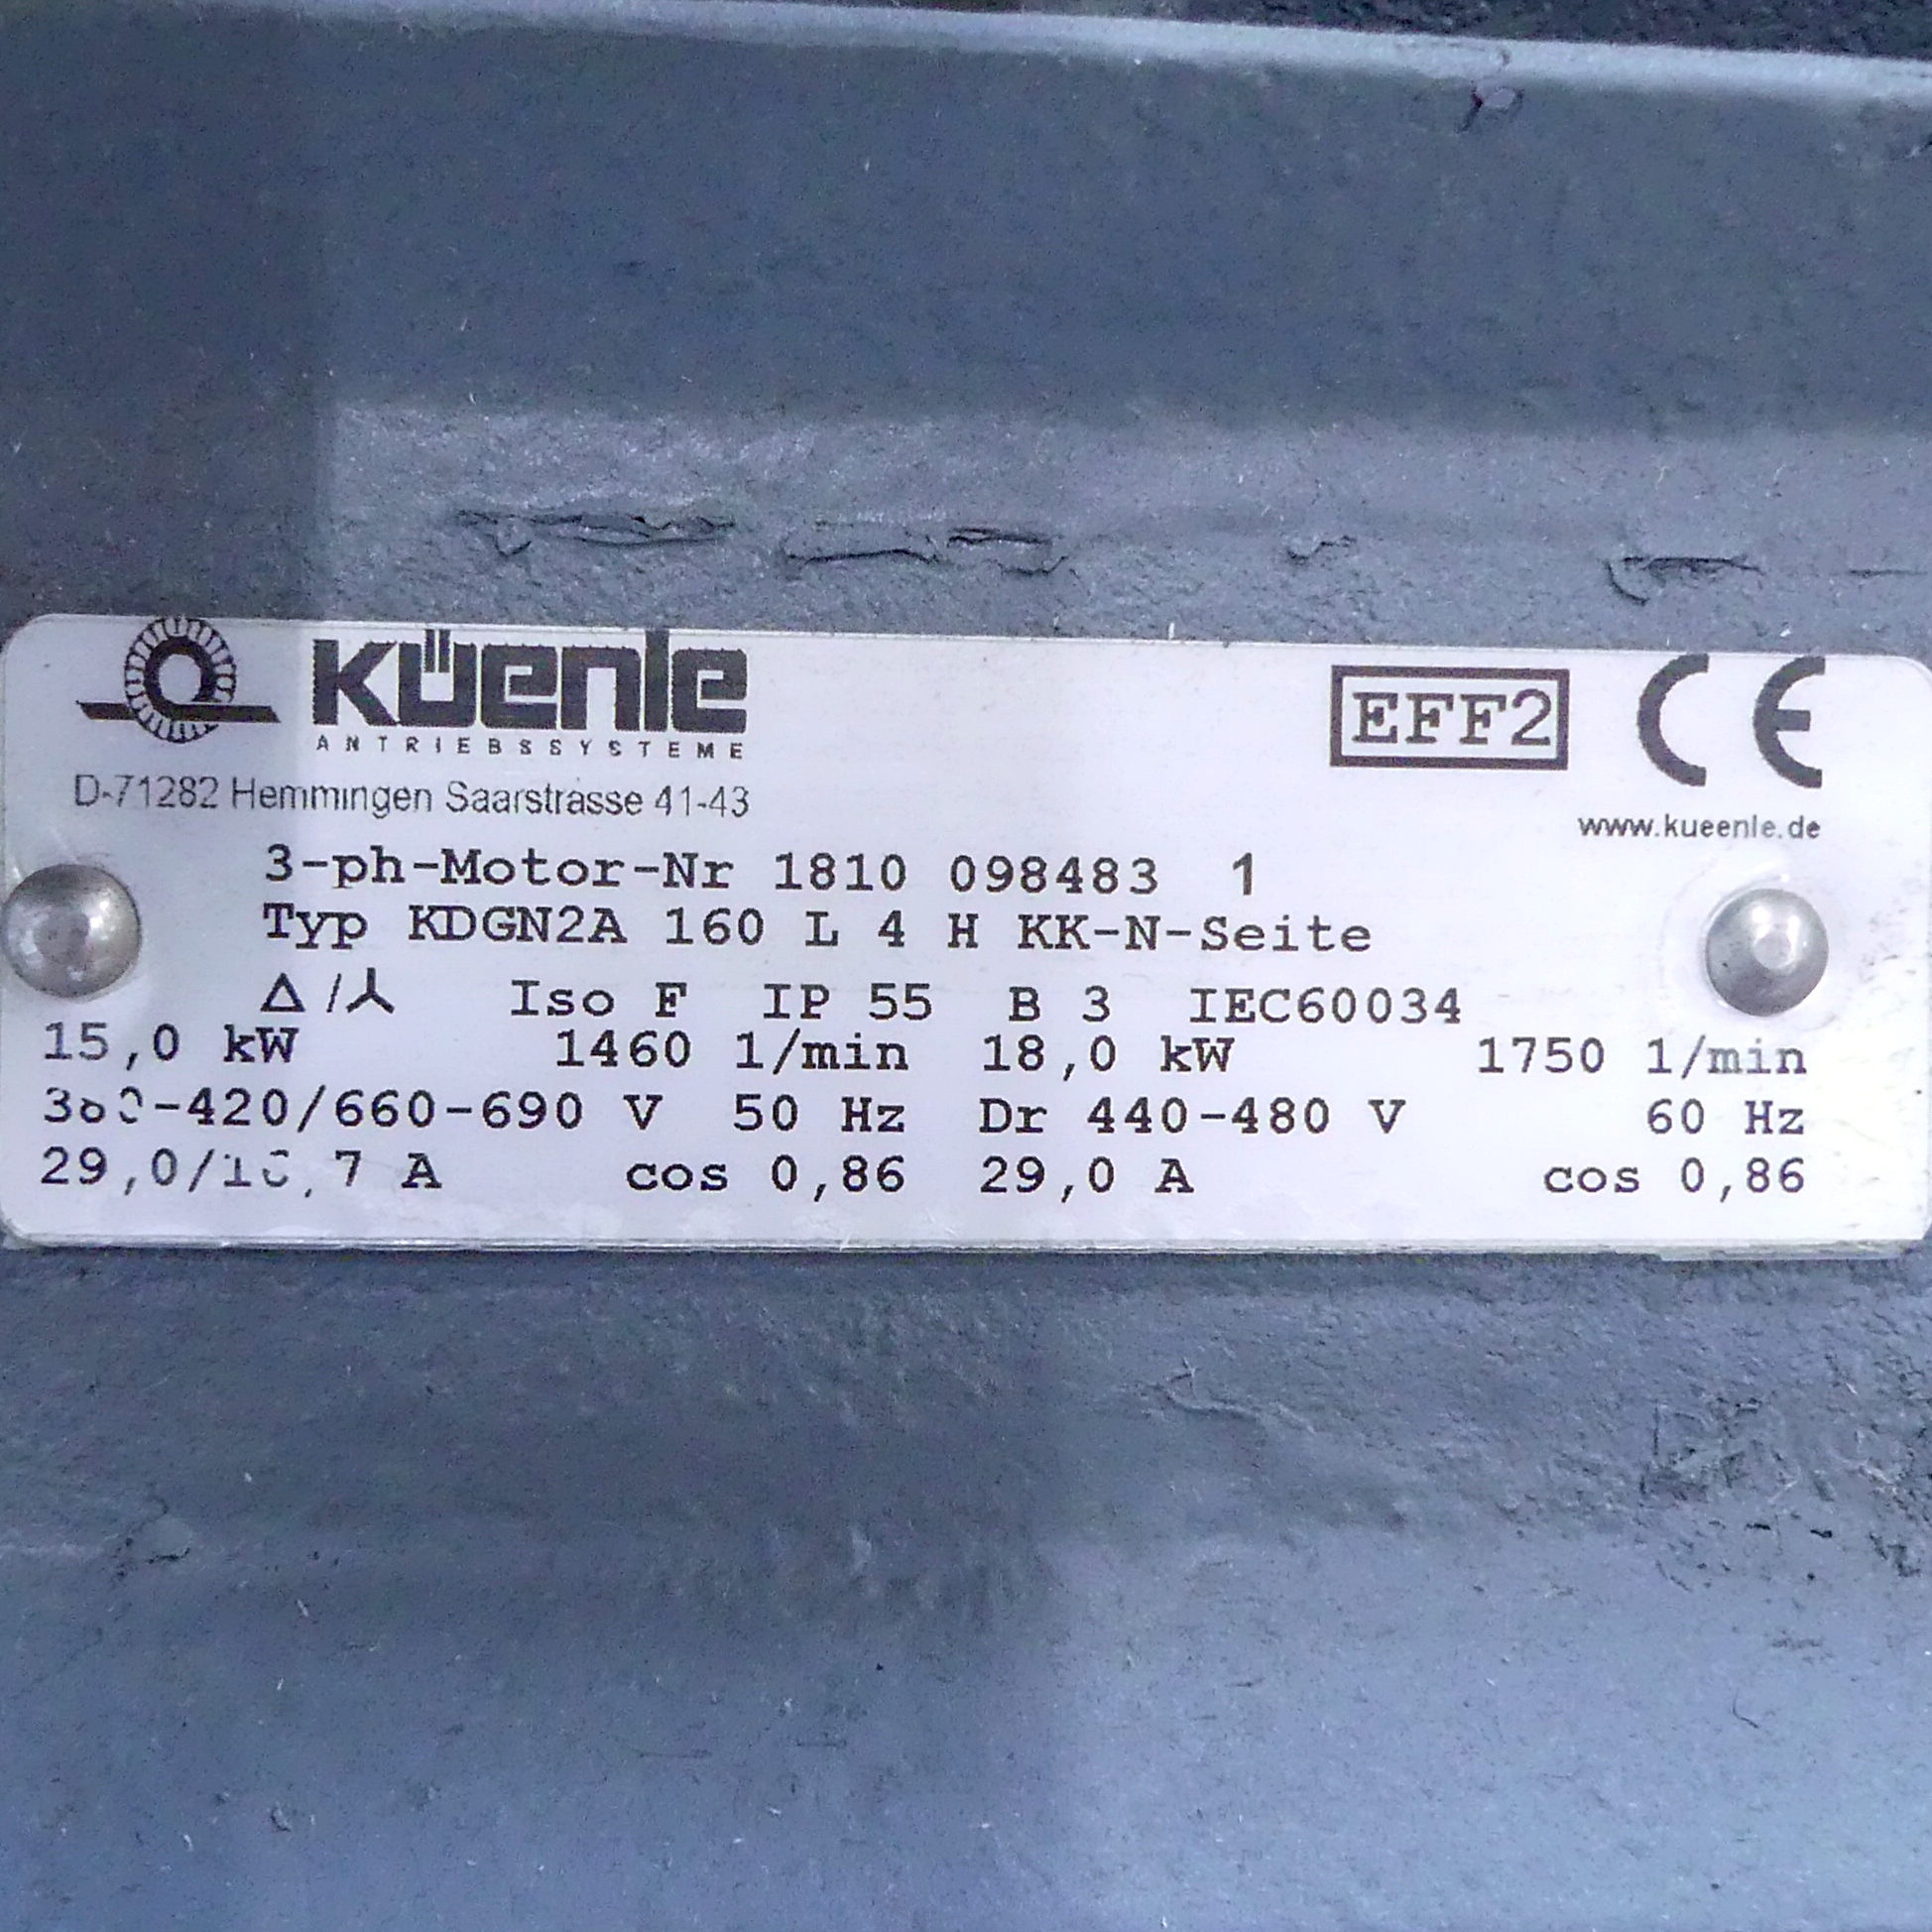 Three-phase motor KDGN2A 160 L 4H 